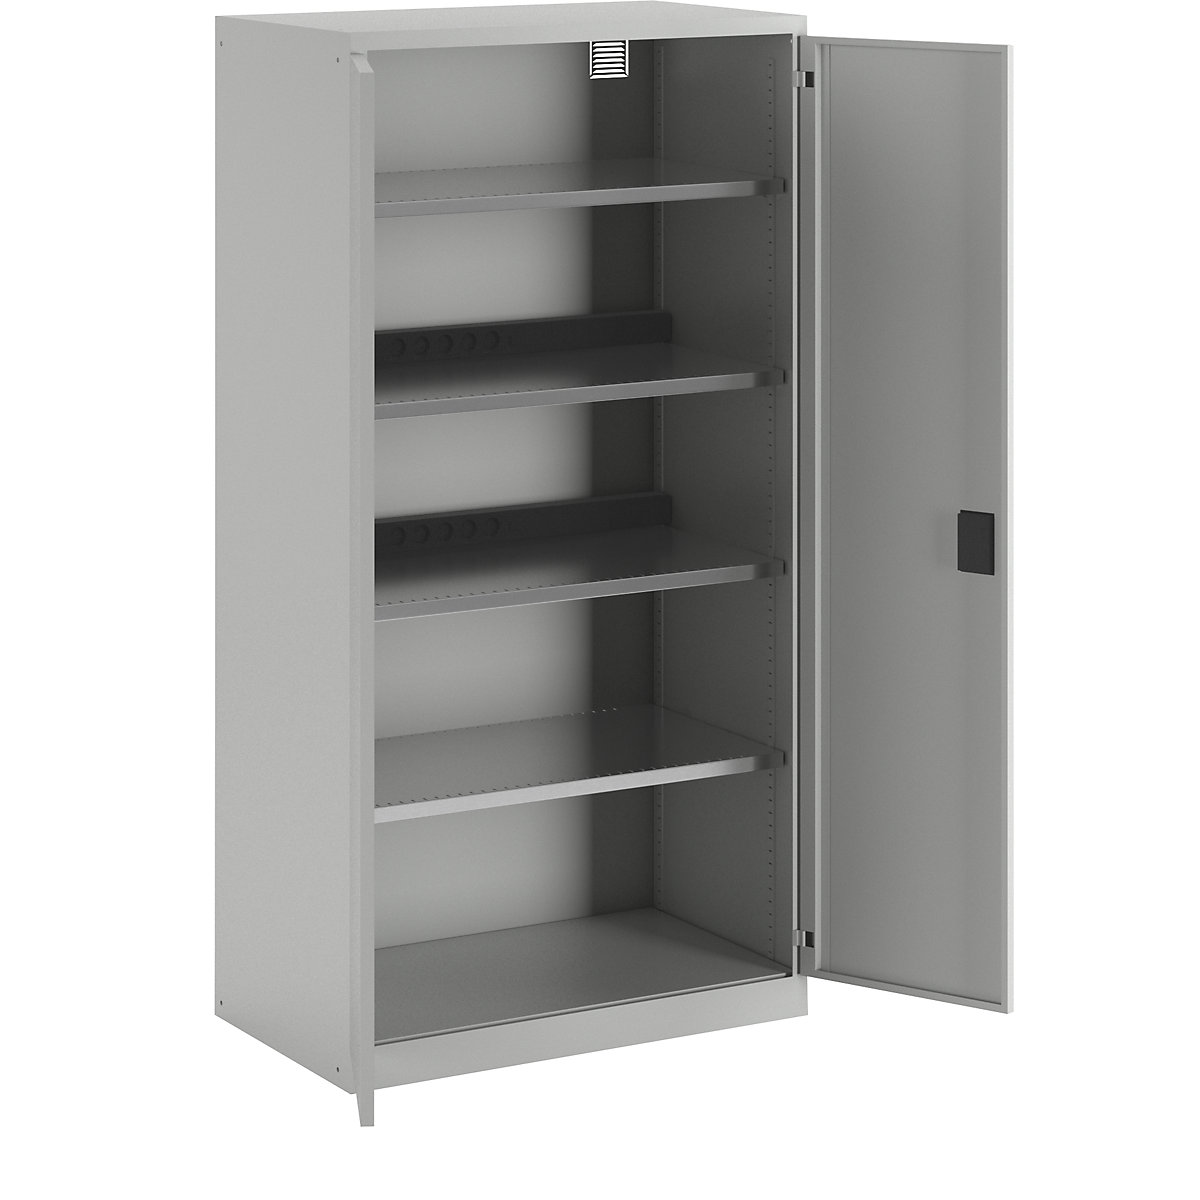 Battery charging cabinet – LISTA, 4 shelves, solid panel doors, 2 power strips at rear, grey-23